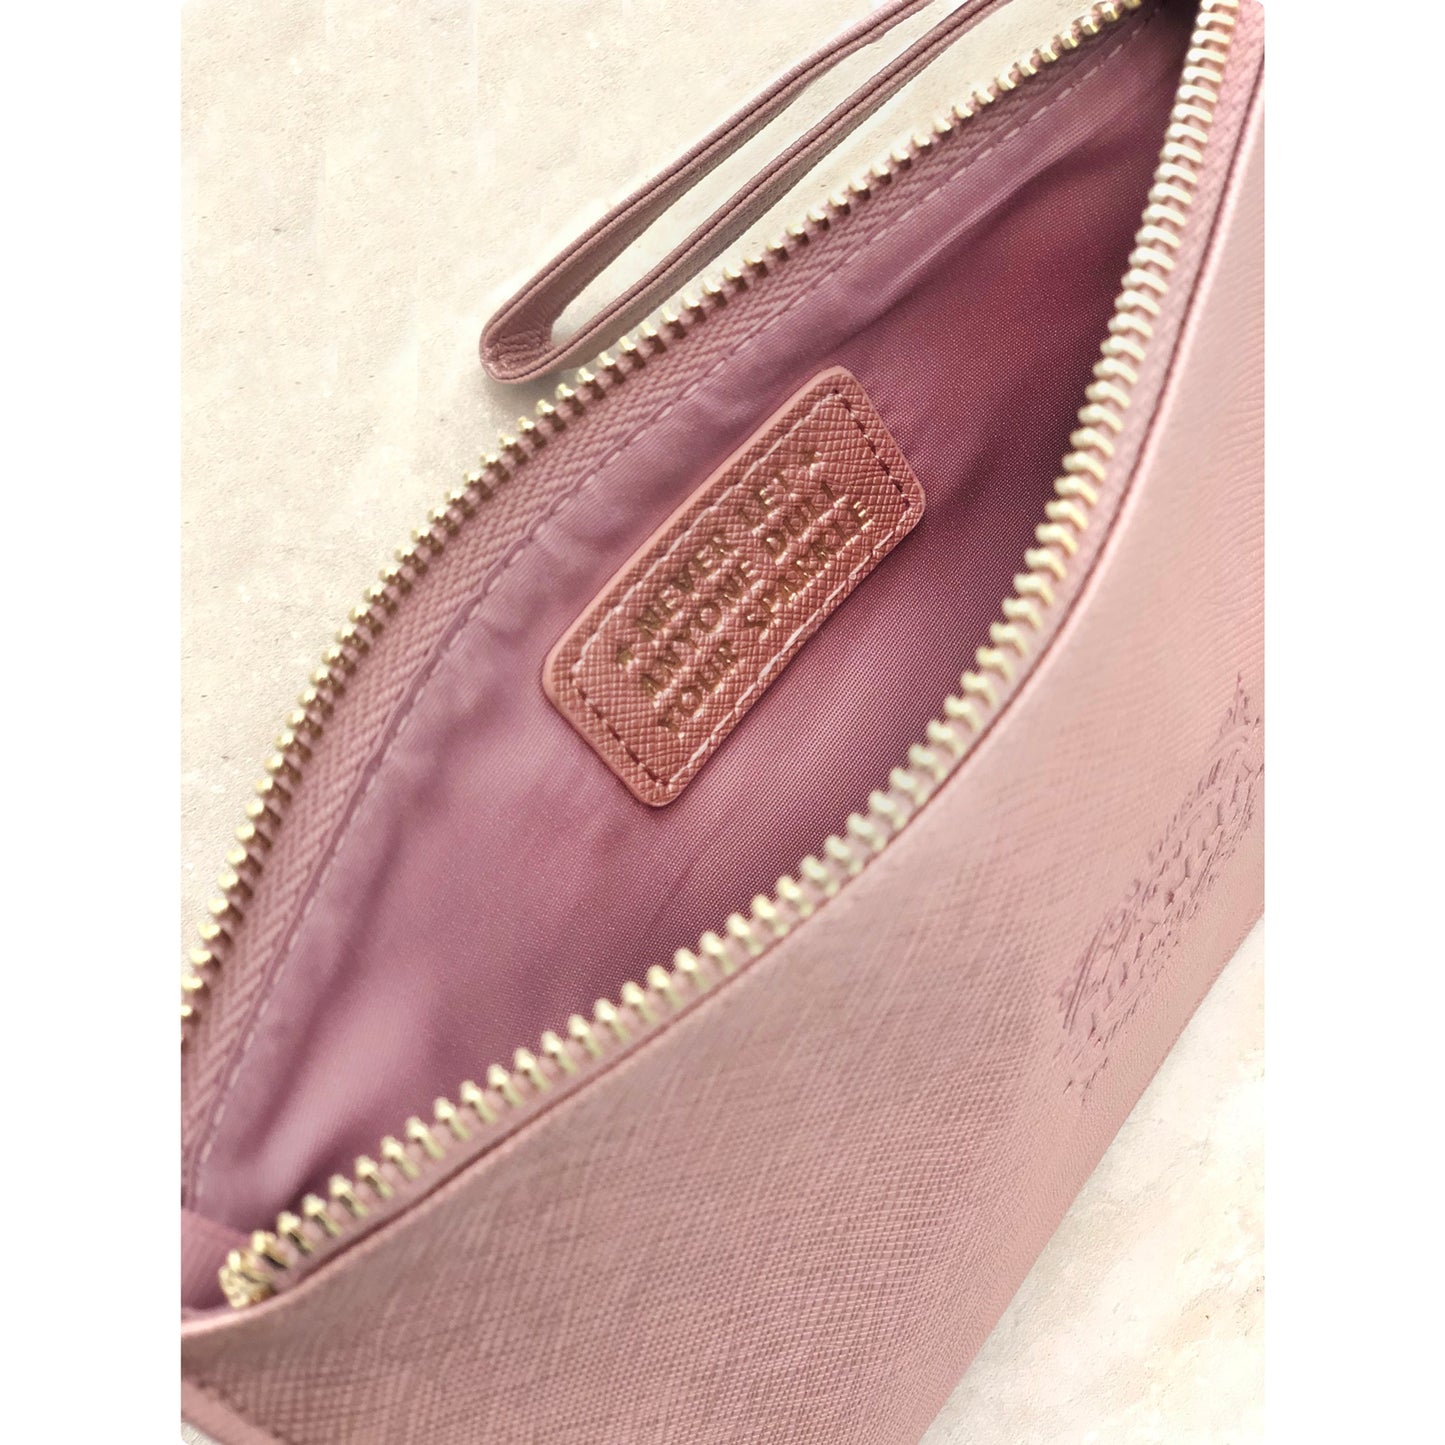 Clutch Bag With Handle & Embossed Text "Tracy"